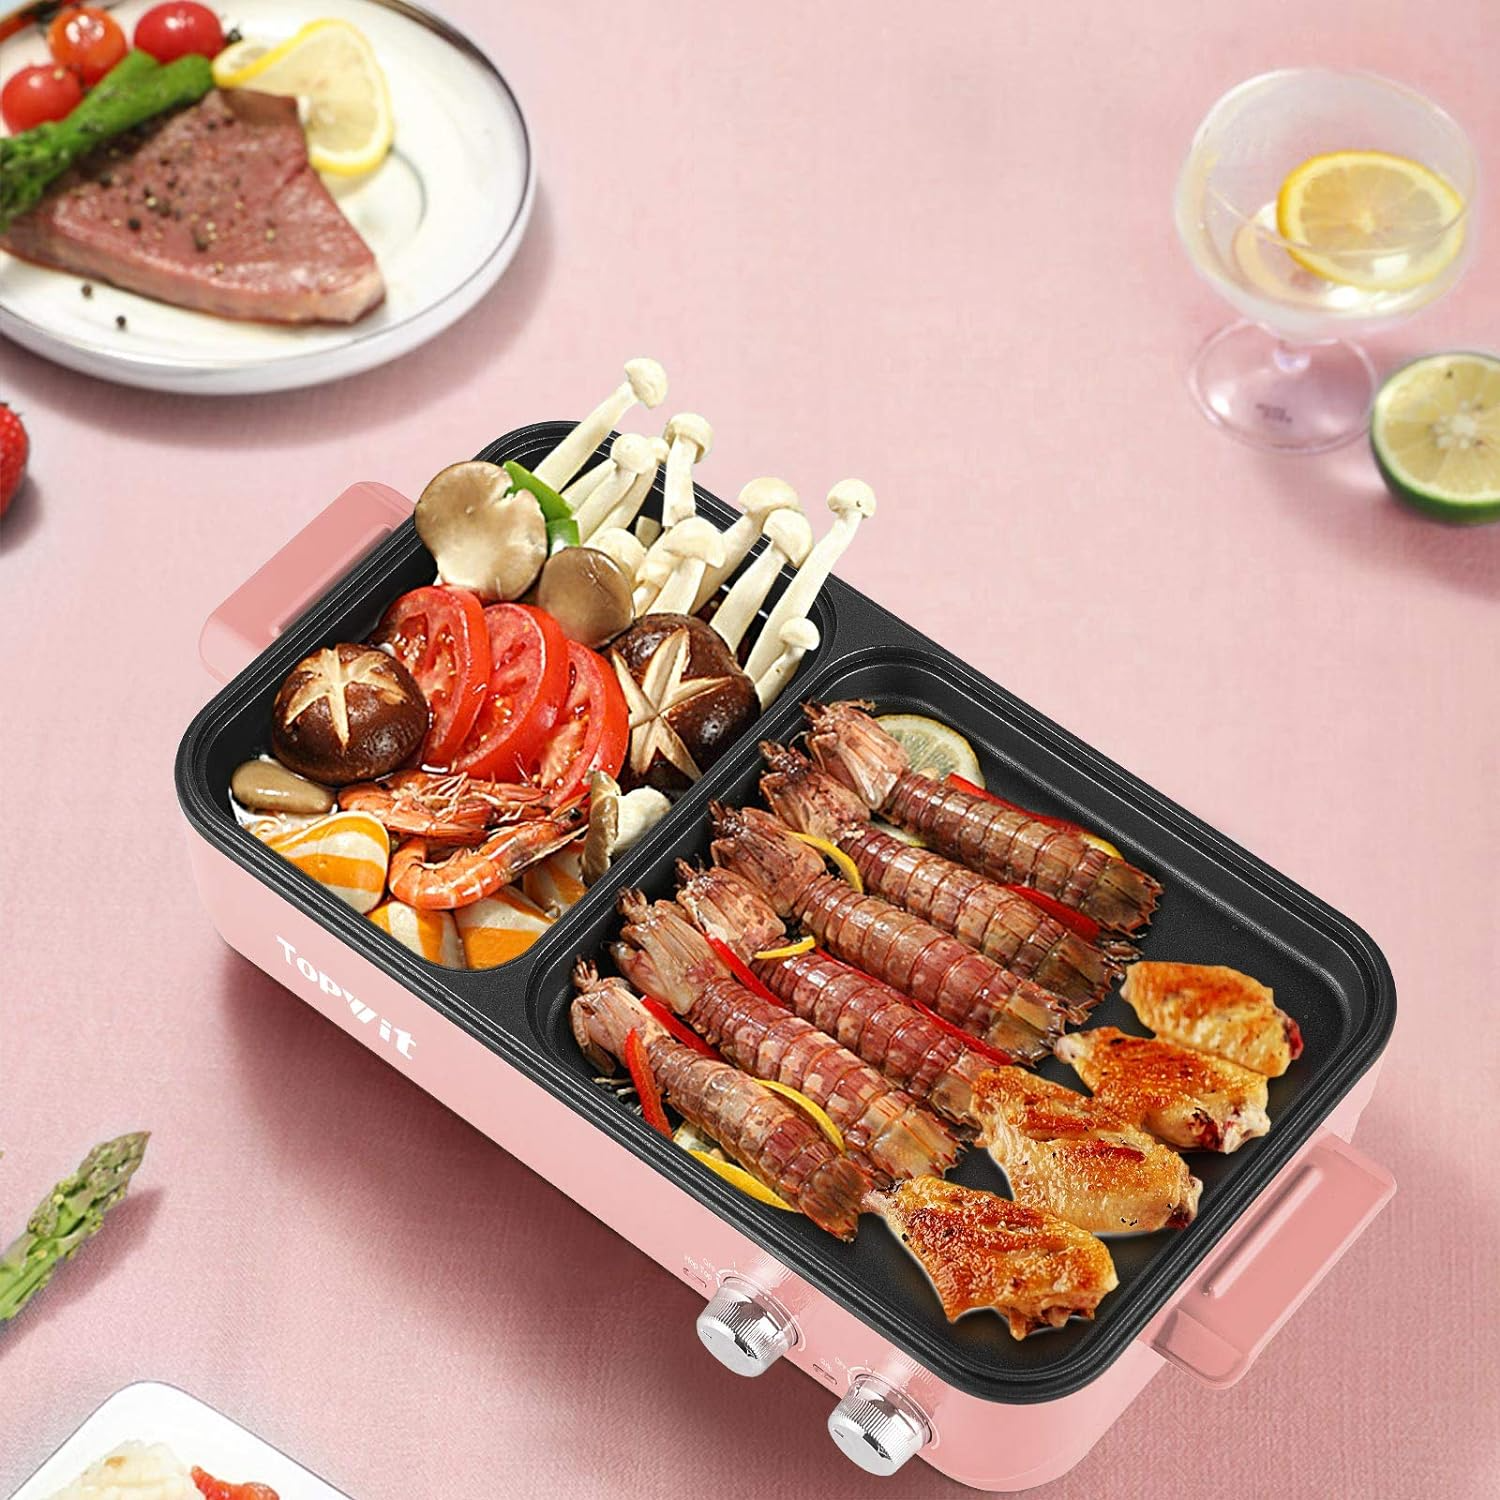 Topwit Hot Pot Electric with Grill, 2 in 1 Indoor Non-stick for Steaks, Shabu Shabu, Noodles, Simmer and Fry, Korean BBQ Grill, Independent Dual Temperature Control, Pink - Barbecue Whizz...Watch My Smoke!